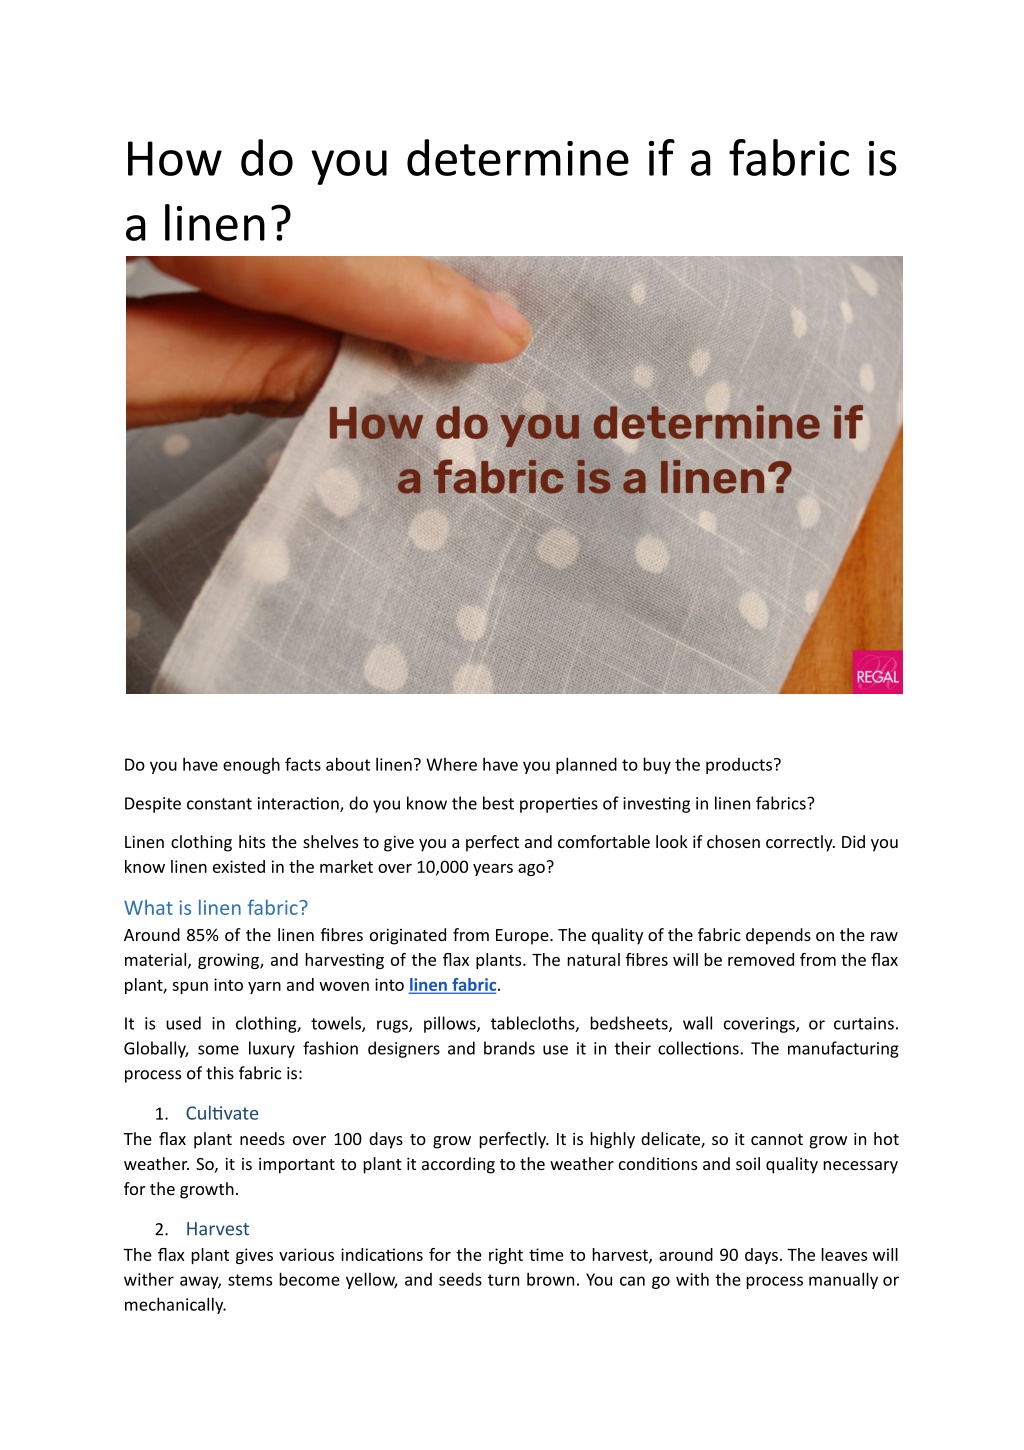 PPT - How do you determine if a fabric is a linen_. PowerPoint ...